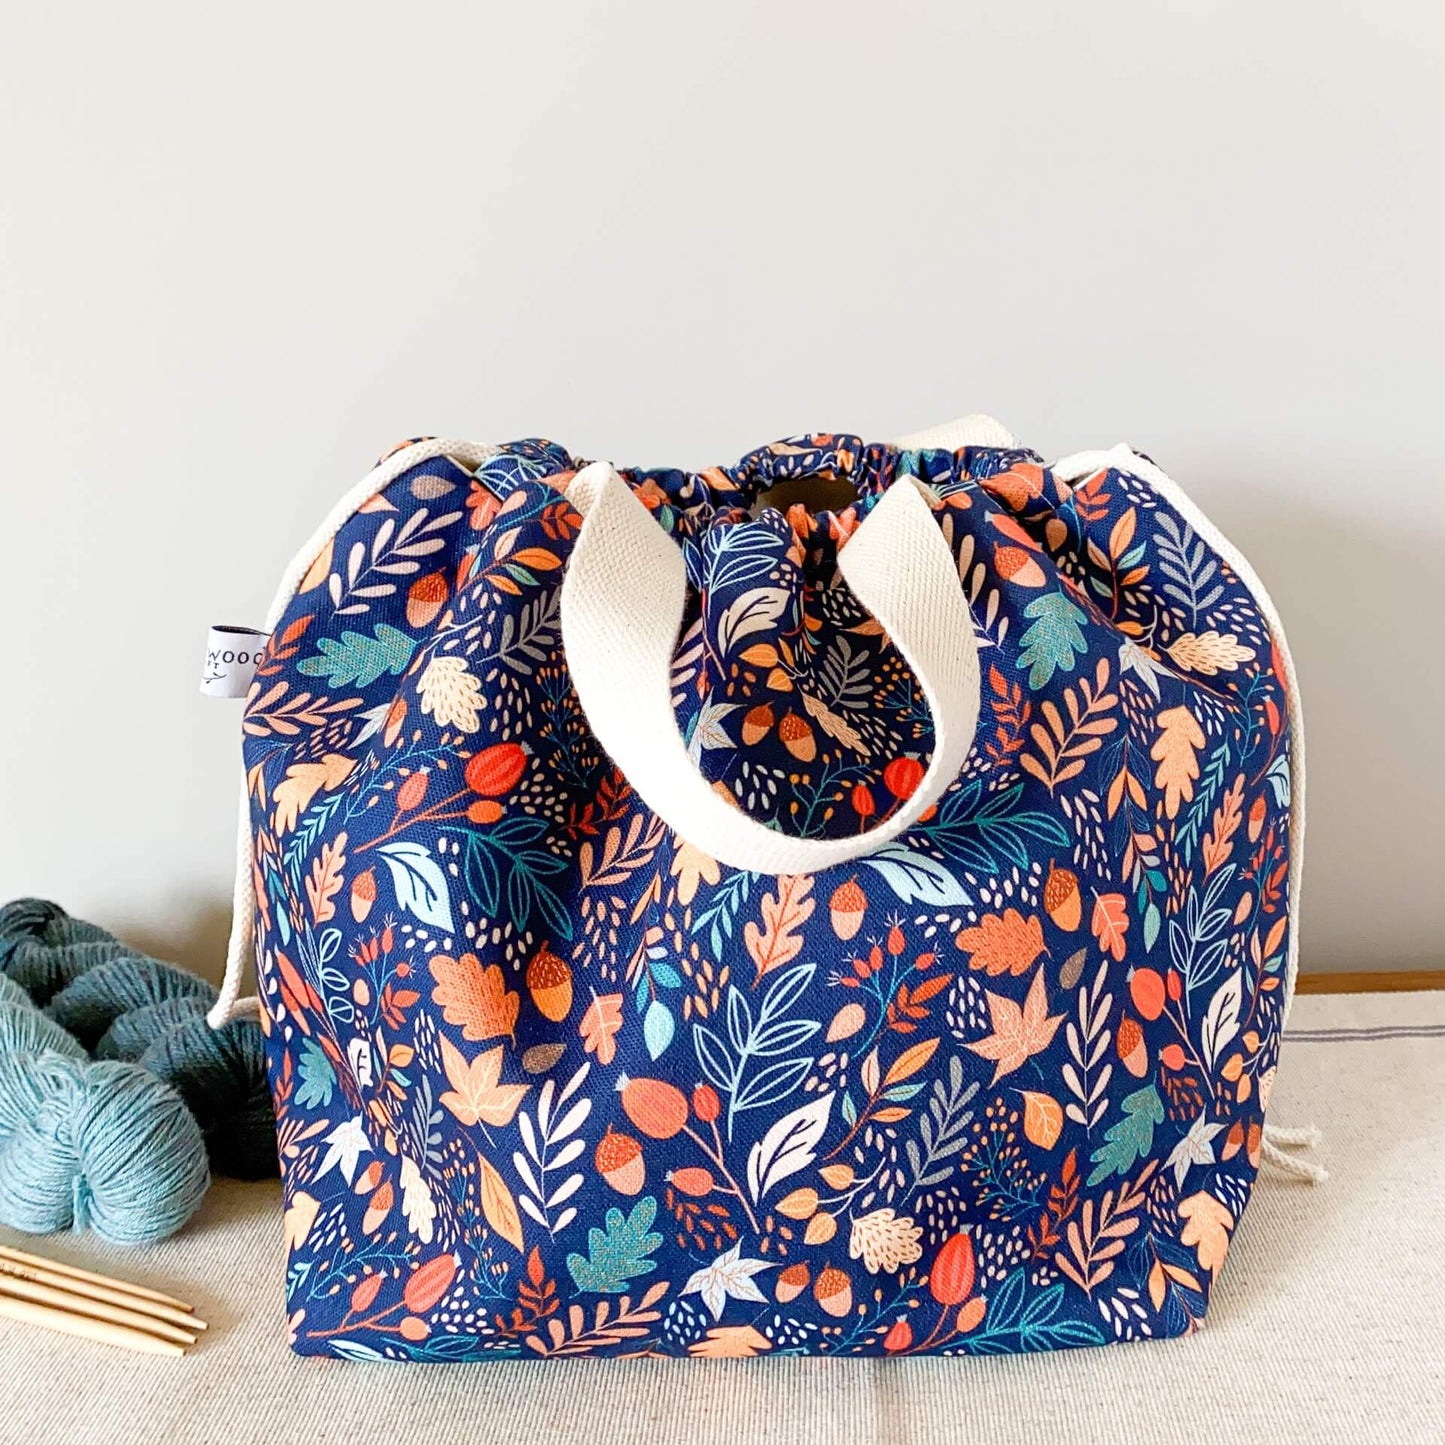 A knitting project bag sits on a table. The bag is made from a fabric that features a bright leaf and acorn print. The top of the bag is pulled closed hiding the contents of the bag. 